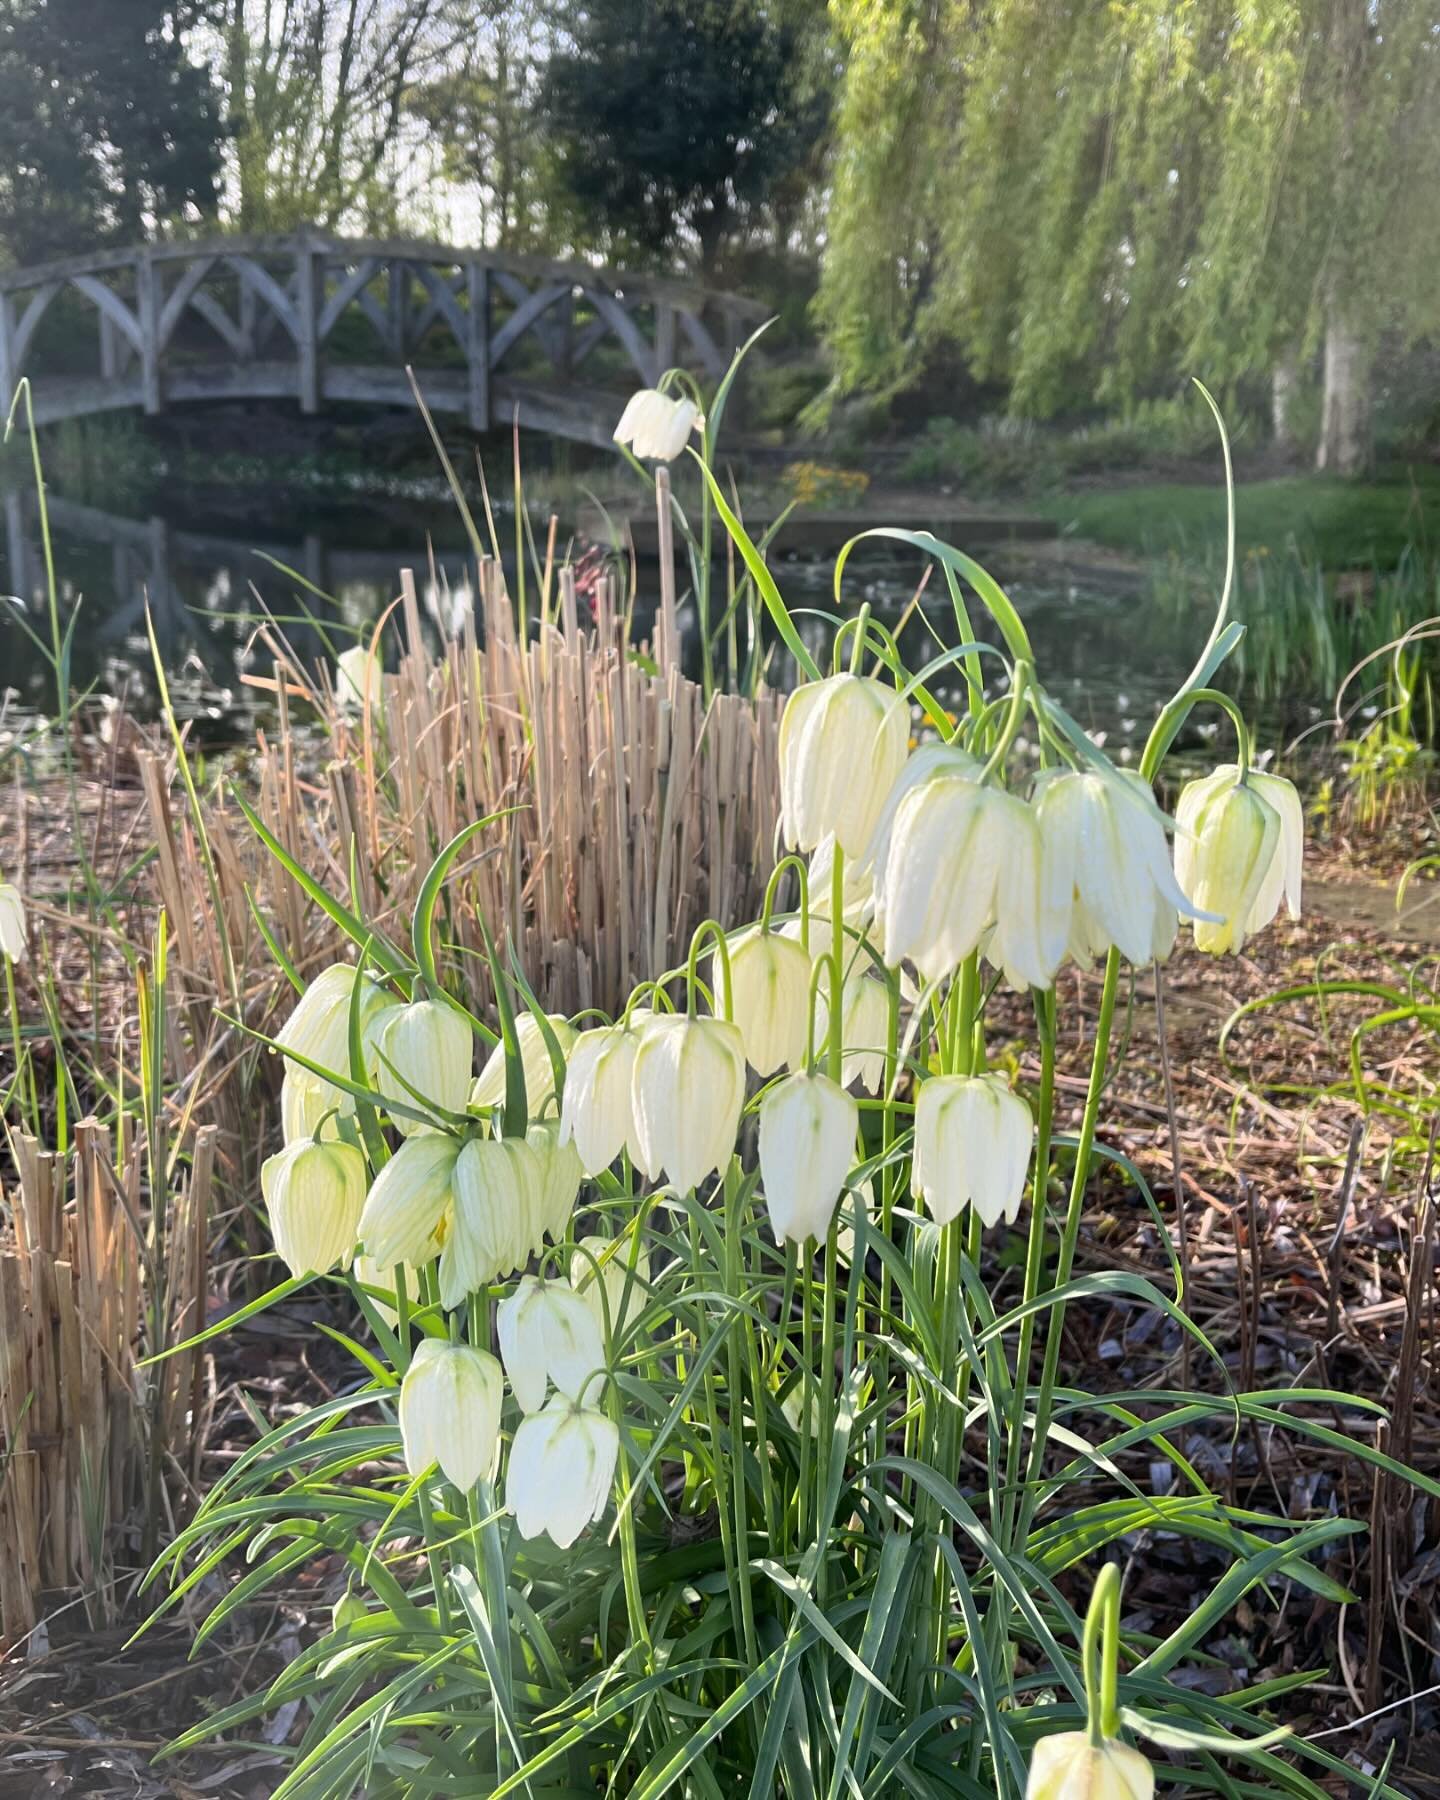 A frenzy of fritillaria by the swimming pond. It&rsquo;s the best year yet for these bulbs (we planted them 9 years ago) for sure 🤍

Mary Botham Howitt&rsquo;s 1873 poem on &ldquo;the Wild Fritillary&rdquo; likens the dropping bell of the flower to 